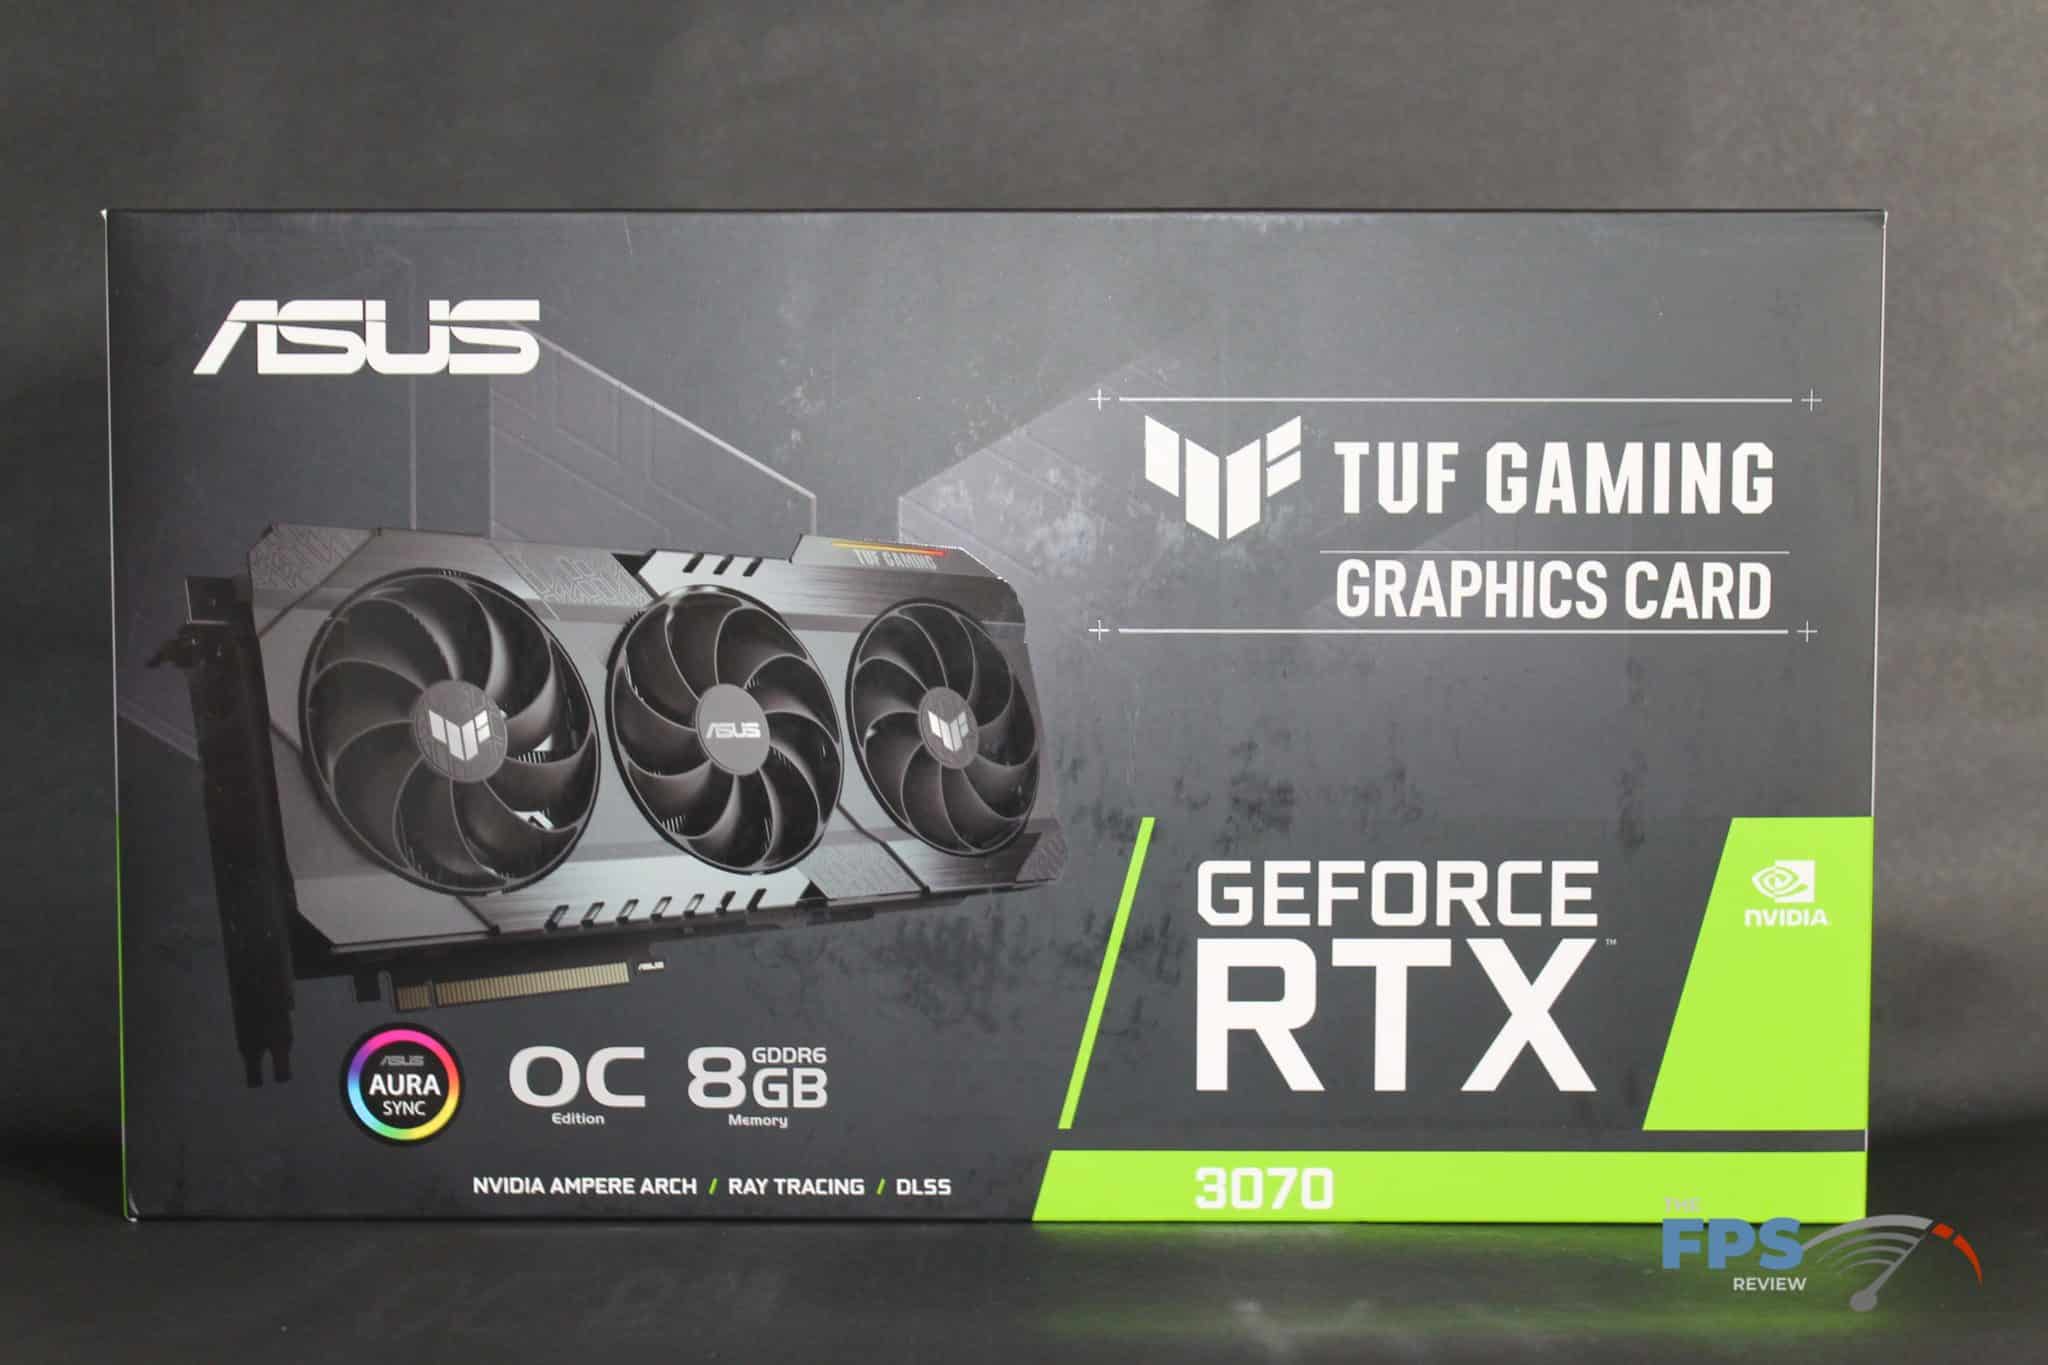 ASUS RTX 3070 TUF GAMING OC Video Card Review - The FPS Review